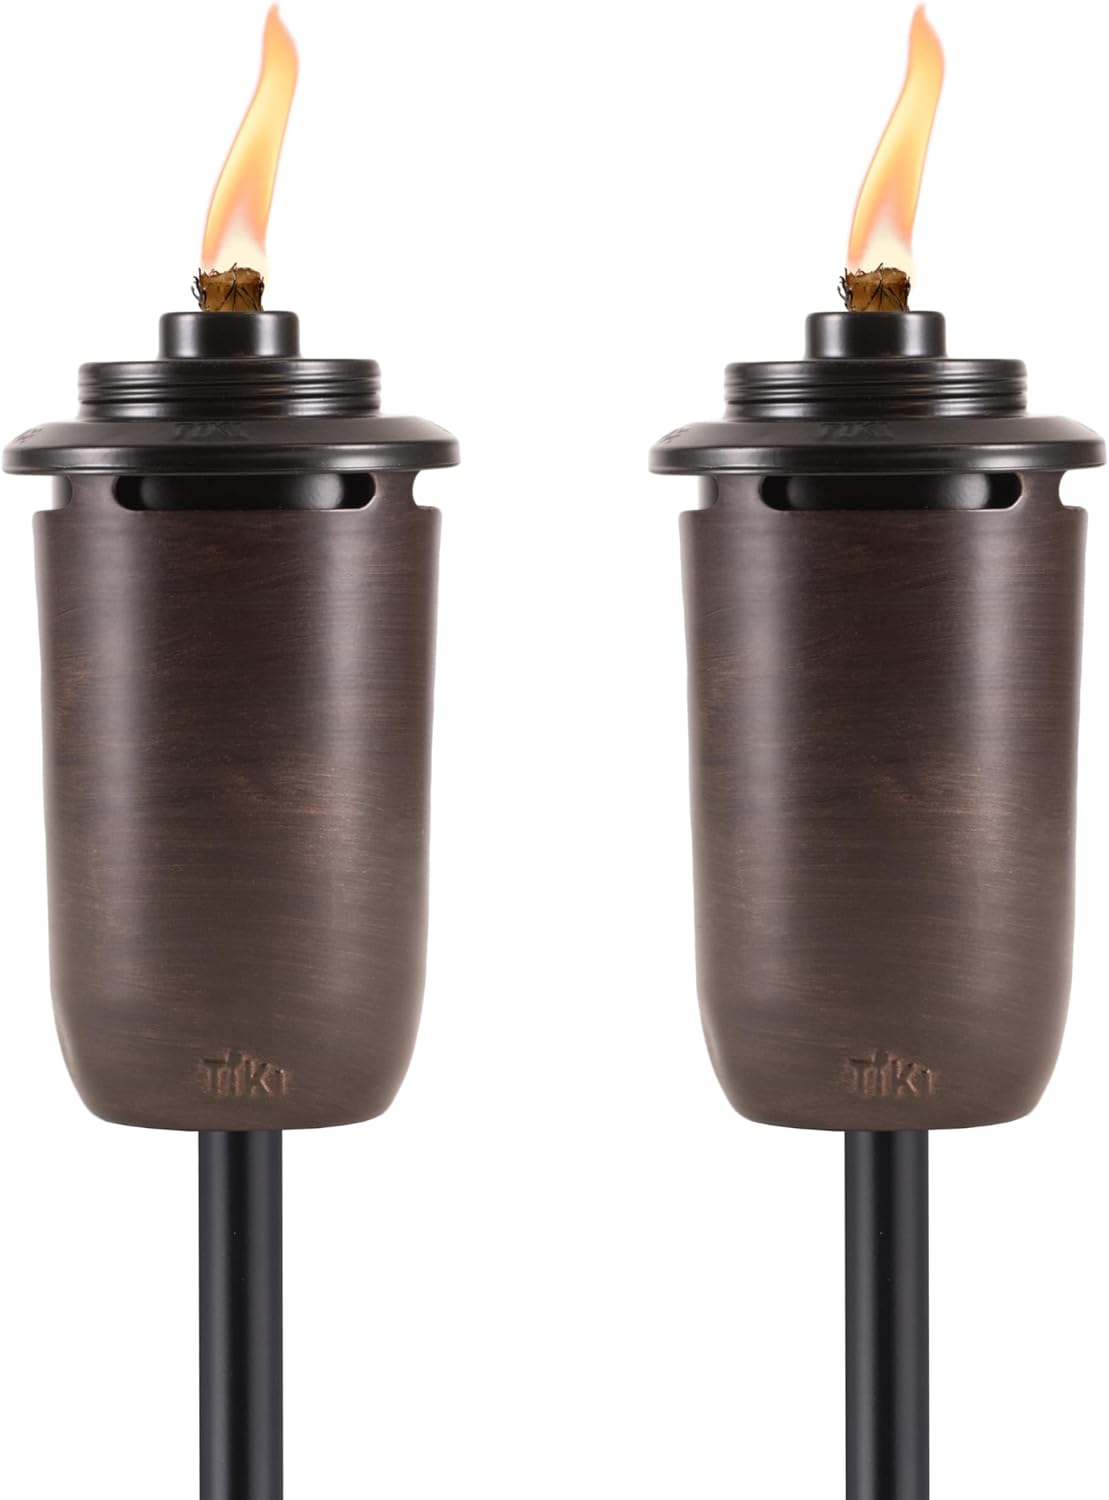 TIKI Brand 2-Pack Honey Copper, Tiki Patio, Backyard, and Lawn, Easy Installation, Outdoor Dcor Torch, Bronze, 1123122